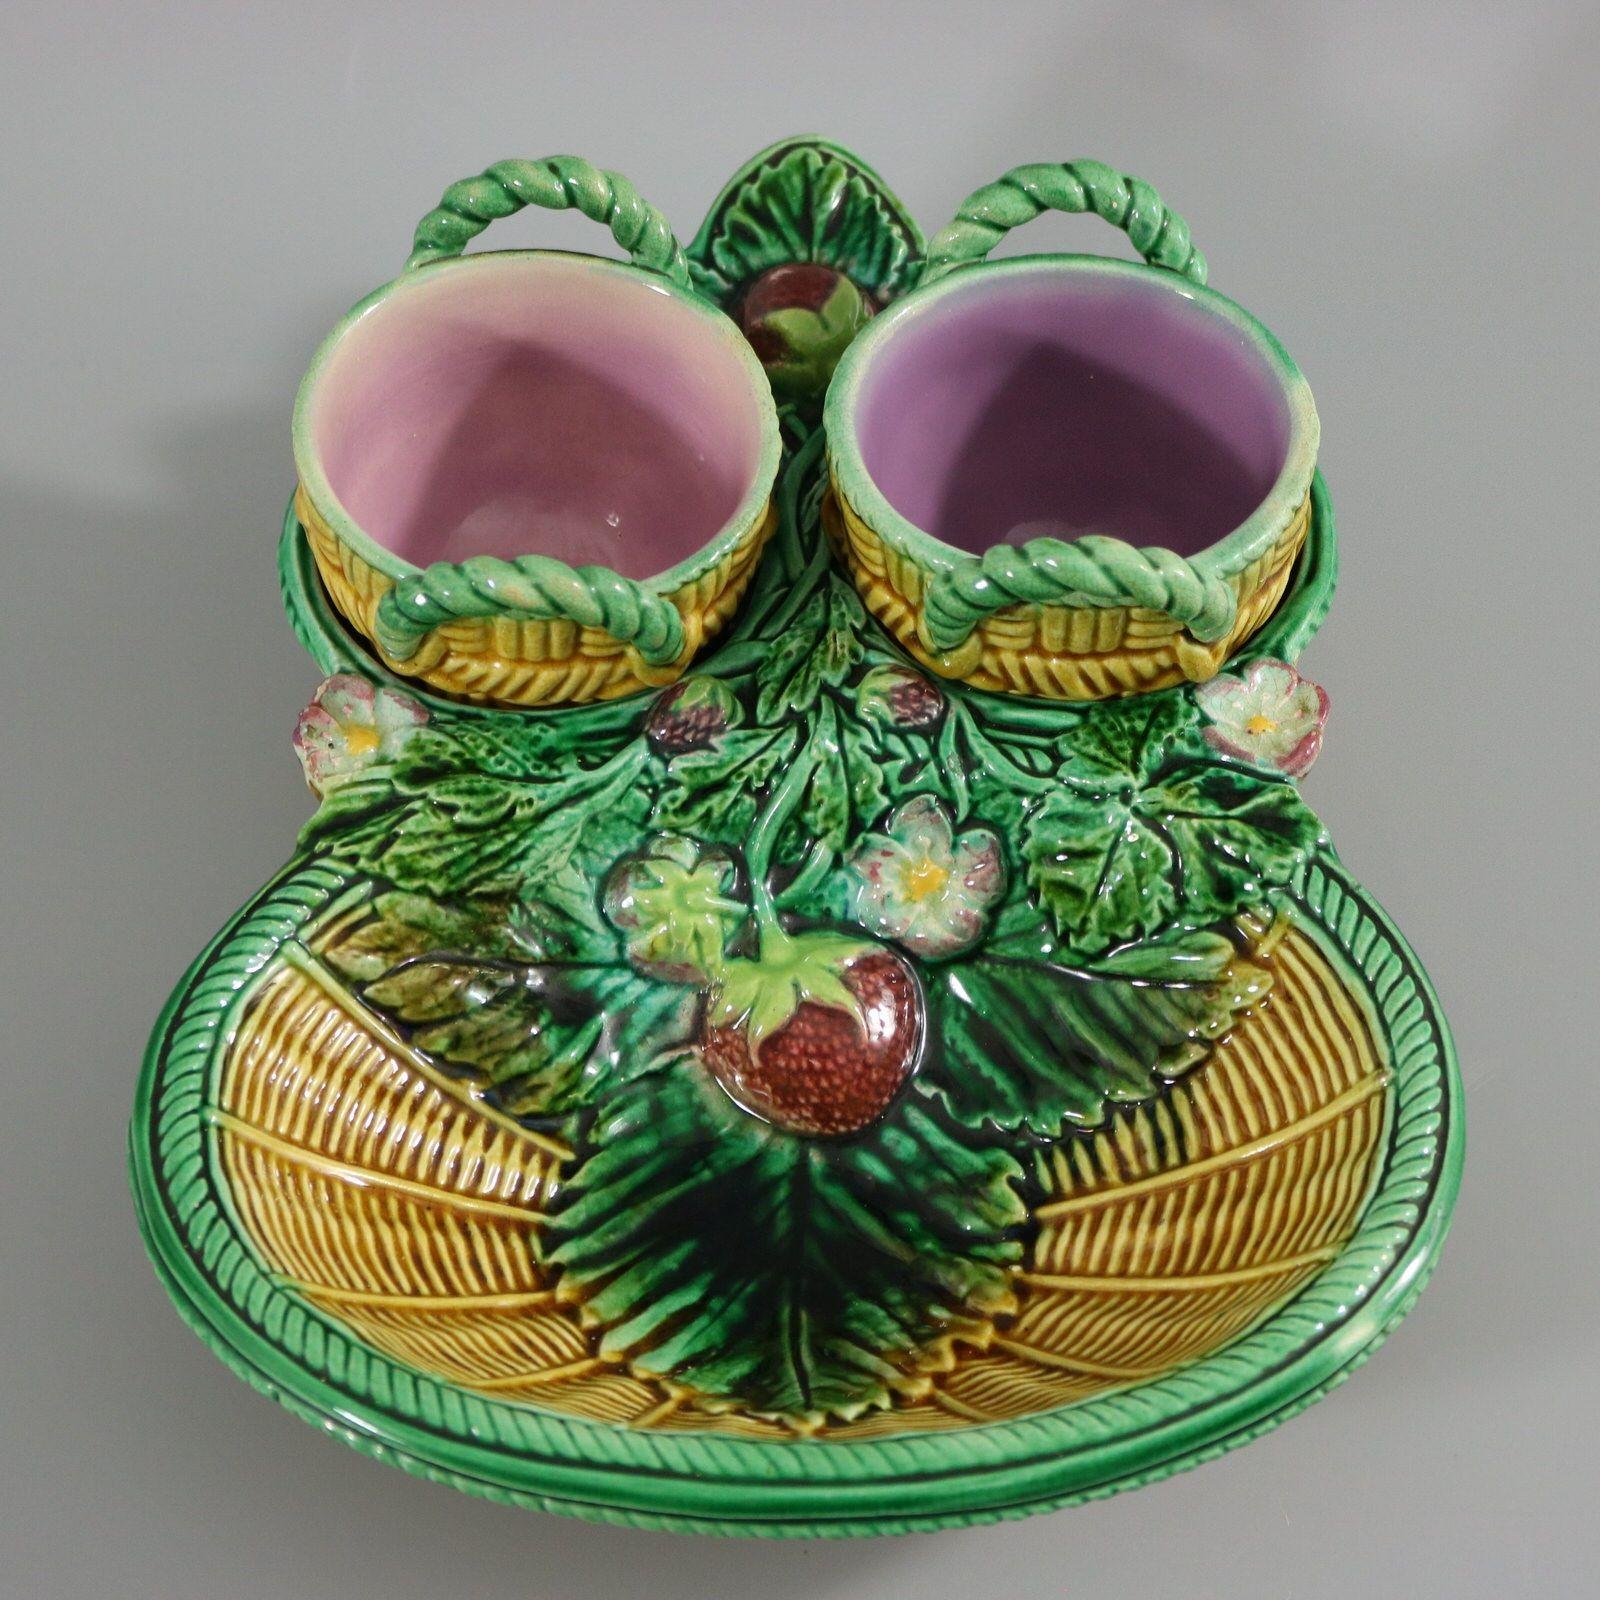 George Jones Majolica strawberry server, creamer & sugar which features a basket with two wells decorated with strawberries, leaves and blossom. Removable cream and sugar bowls in the form of baskets. Colouration: yellow, green, red, are